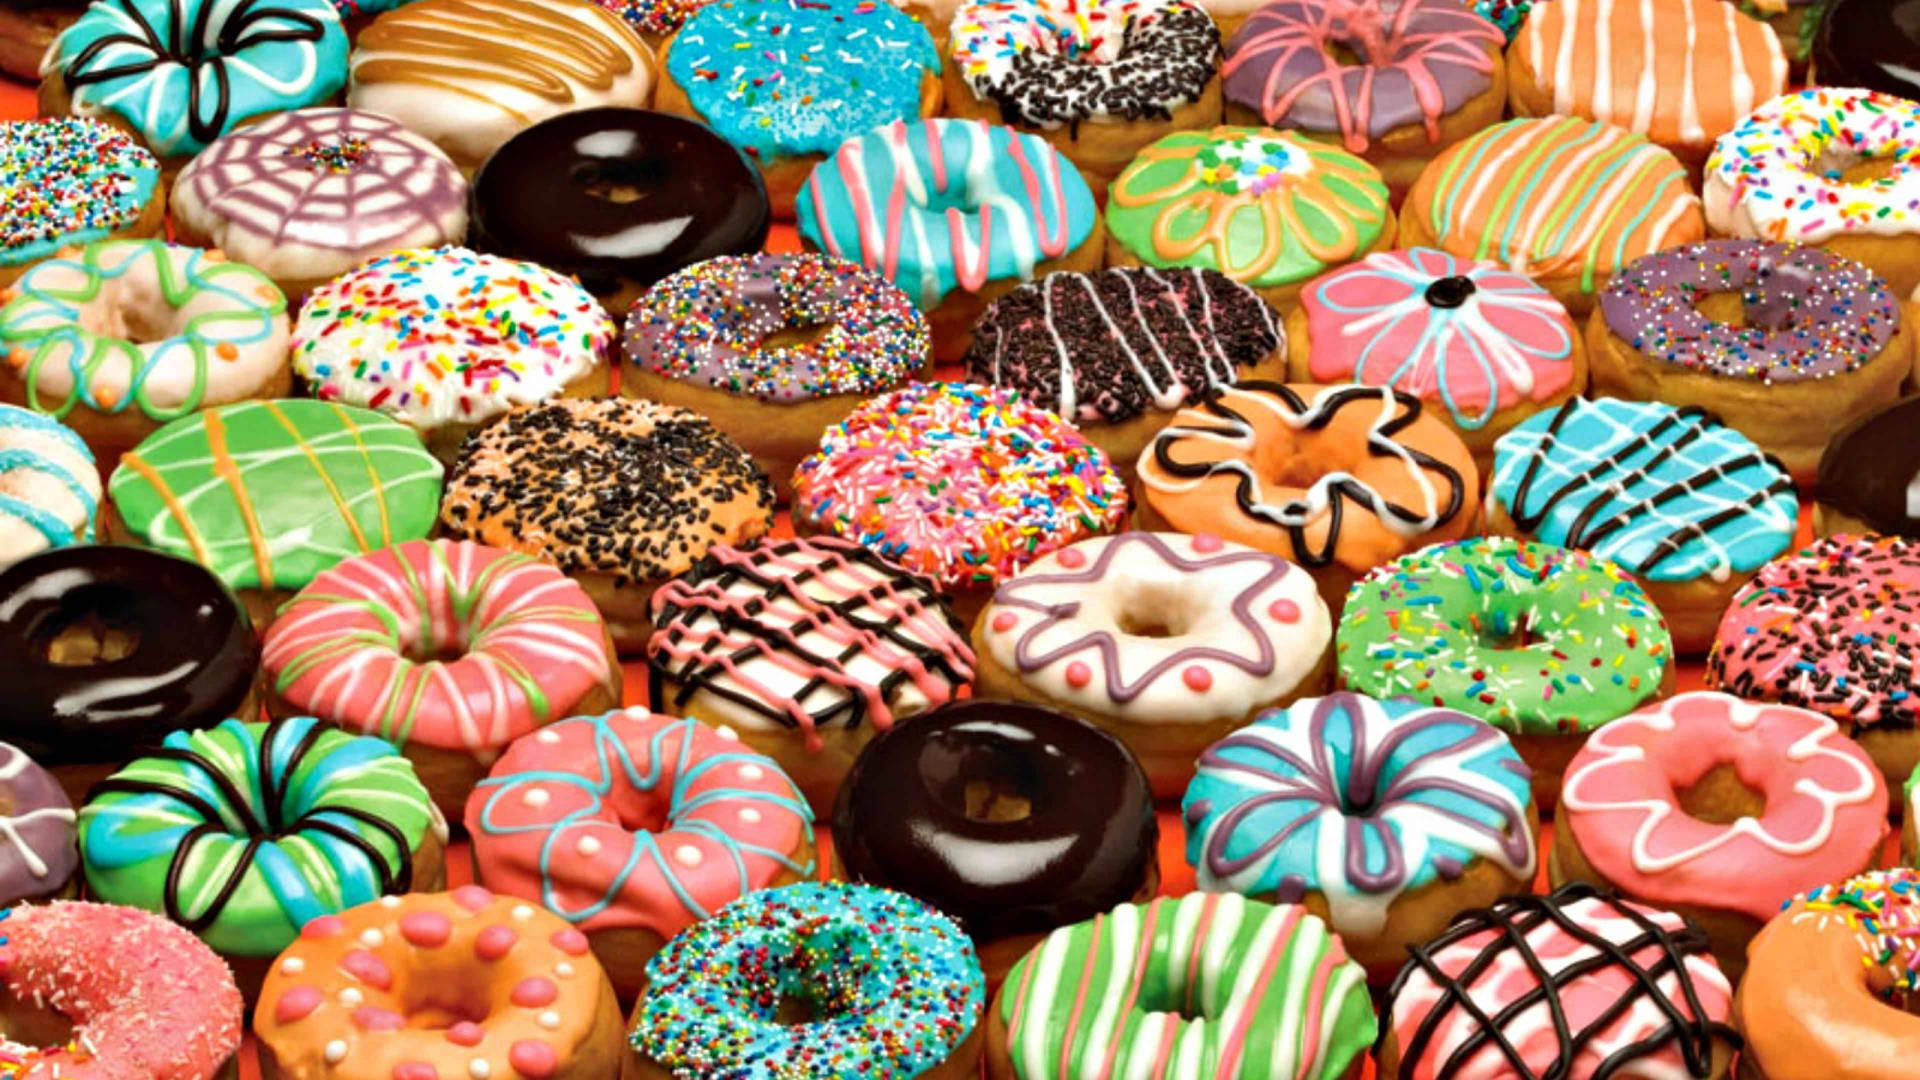 Colorful Donuts With Different Flavors